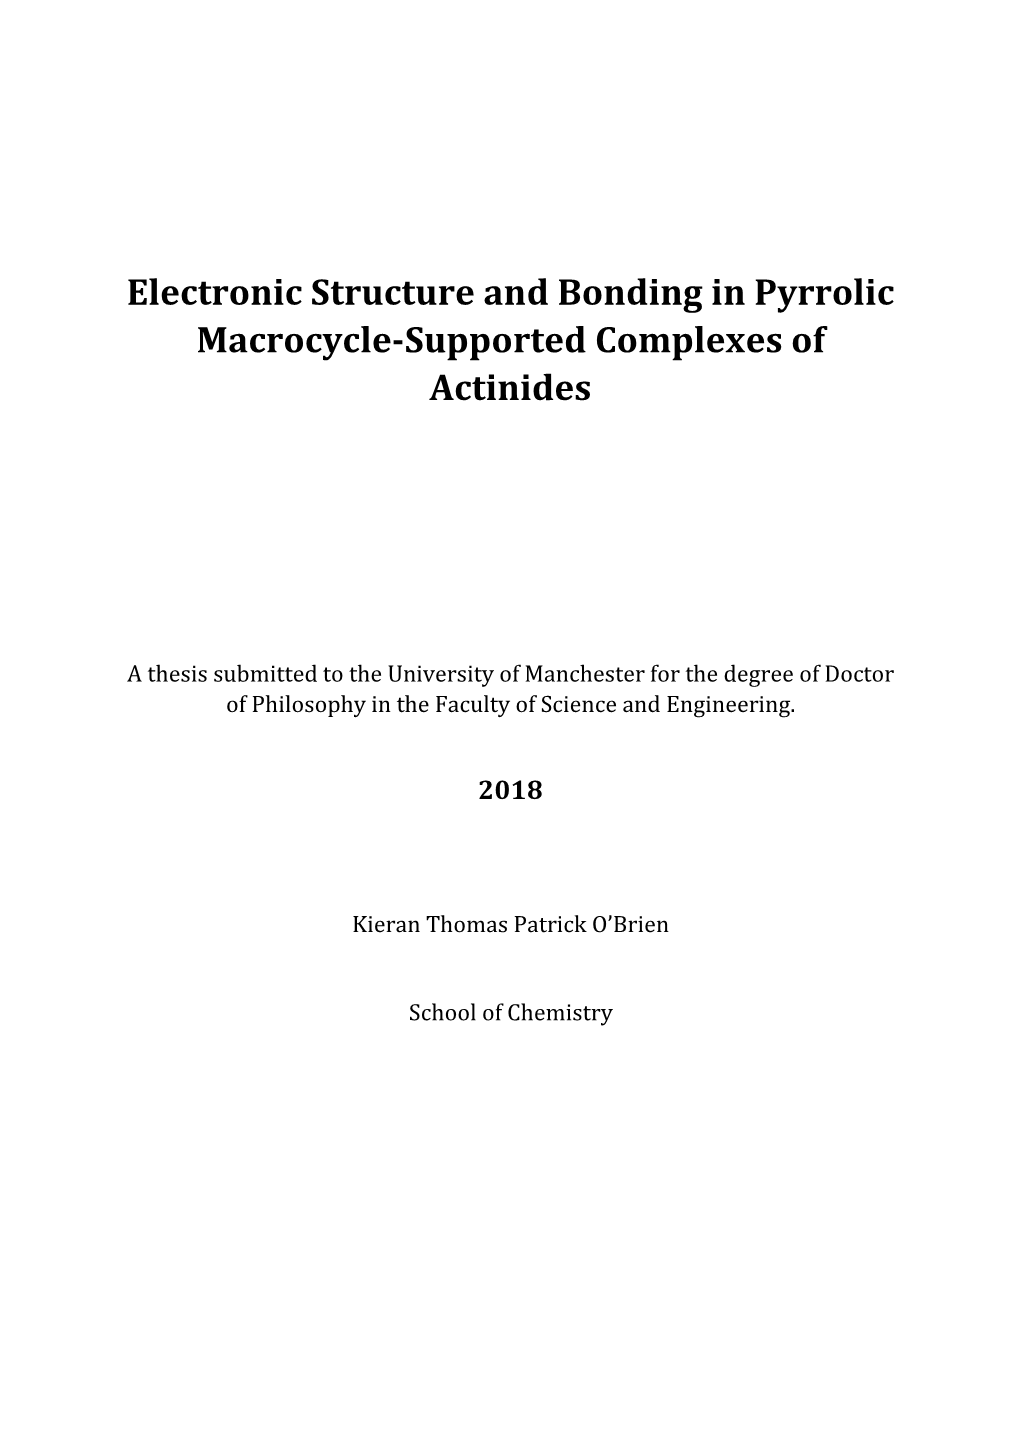 Electronic Structure and Bonding in Pyrrolic Macrocycle-Supported Complexes of Actinides